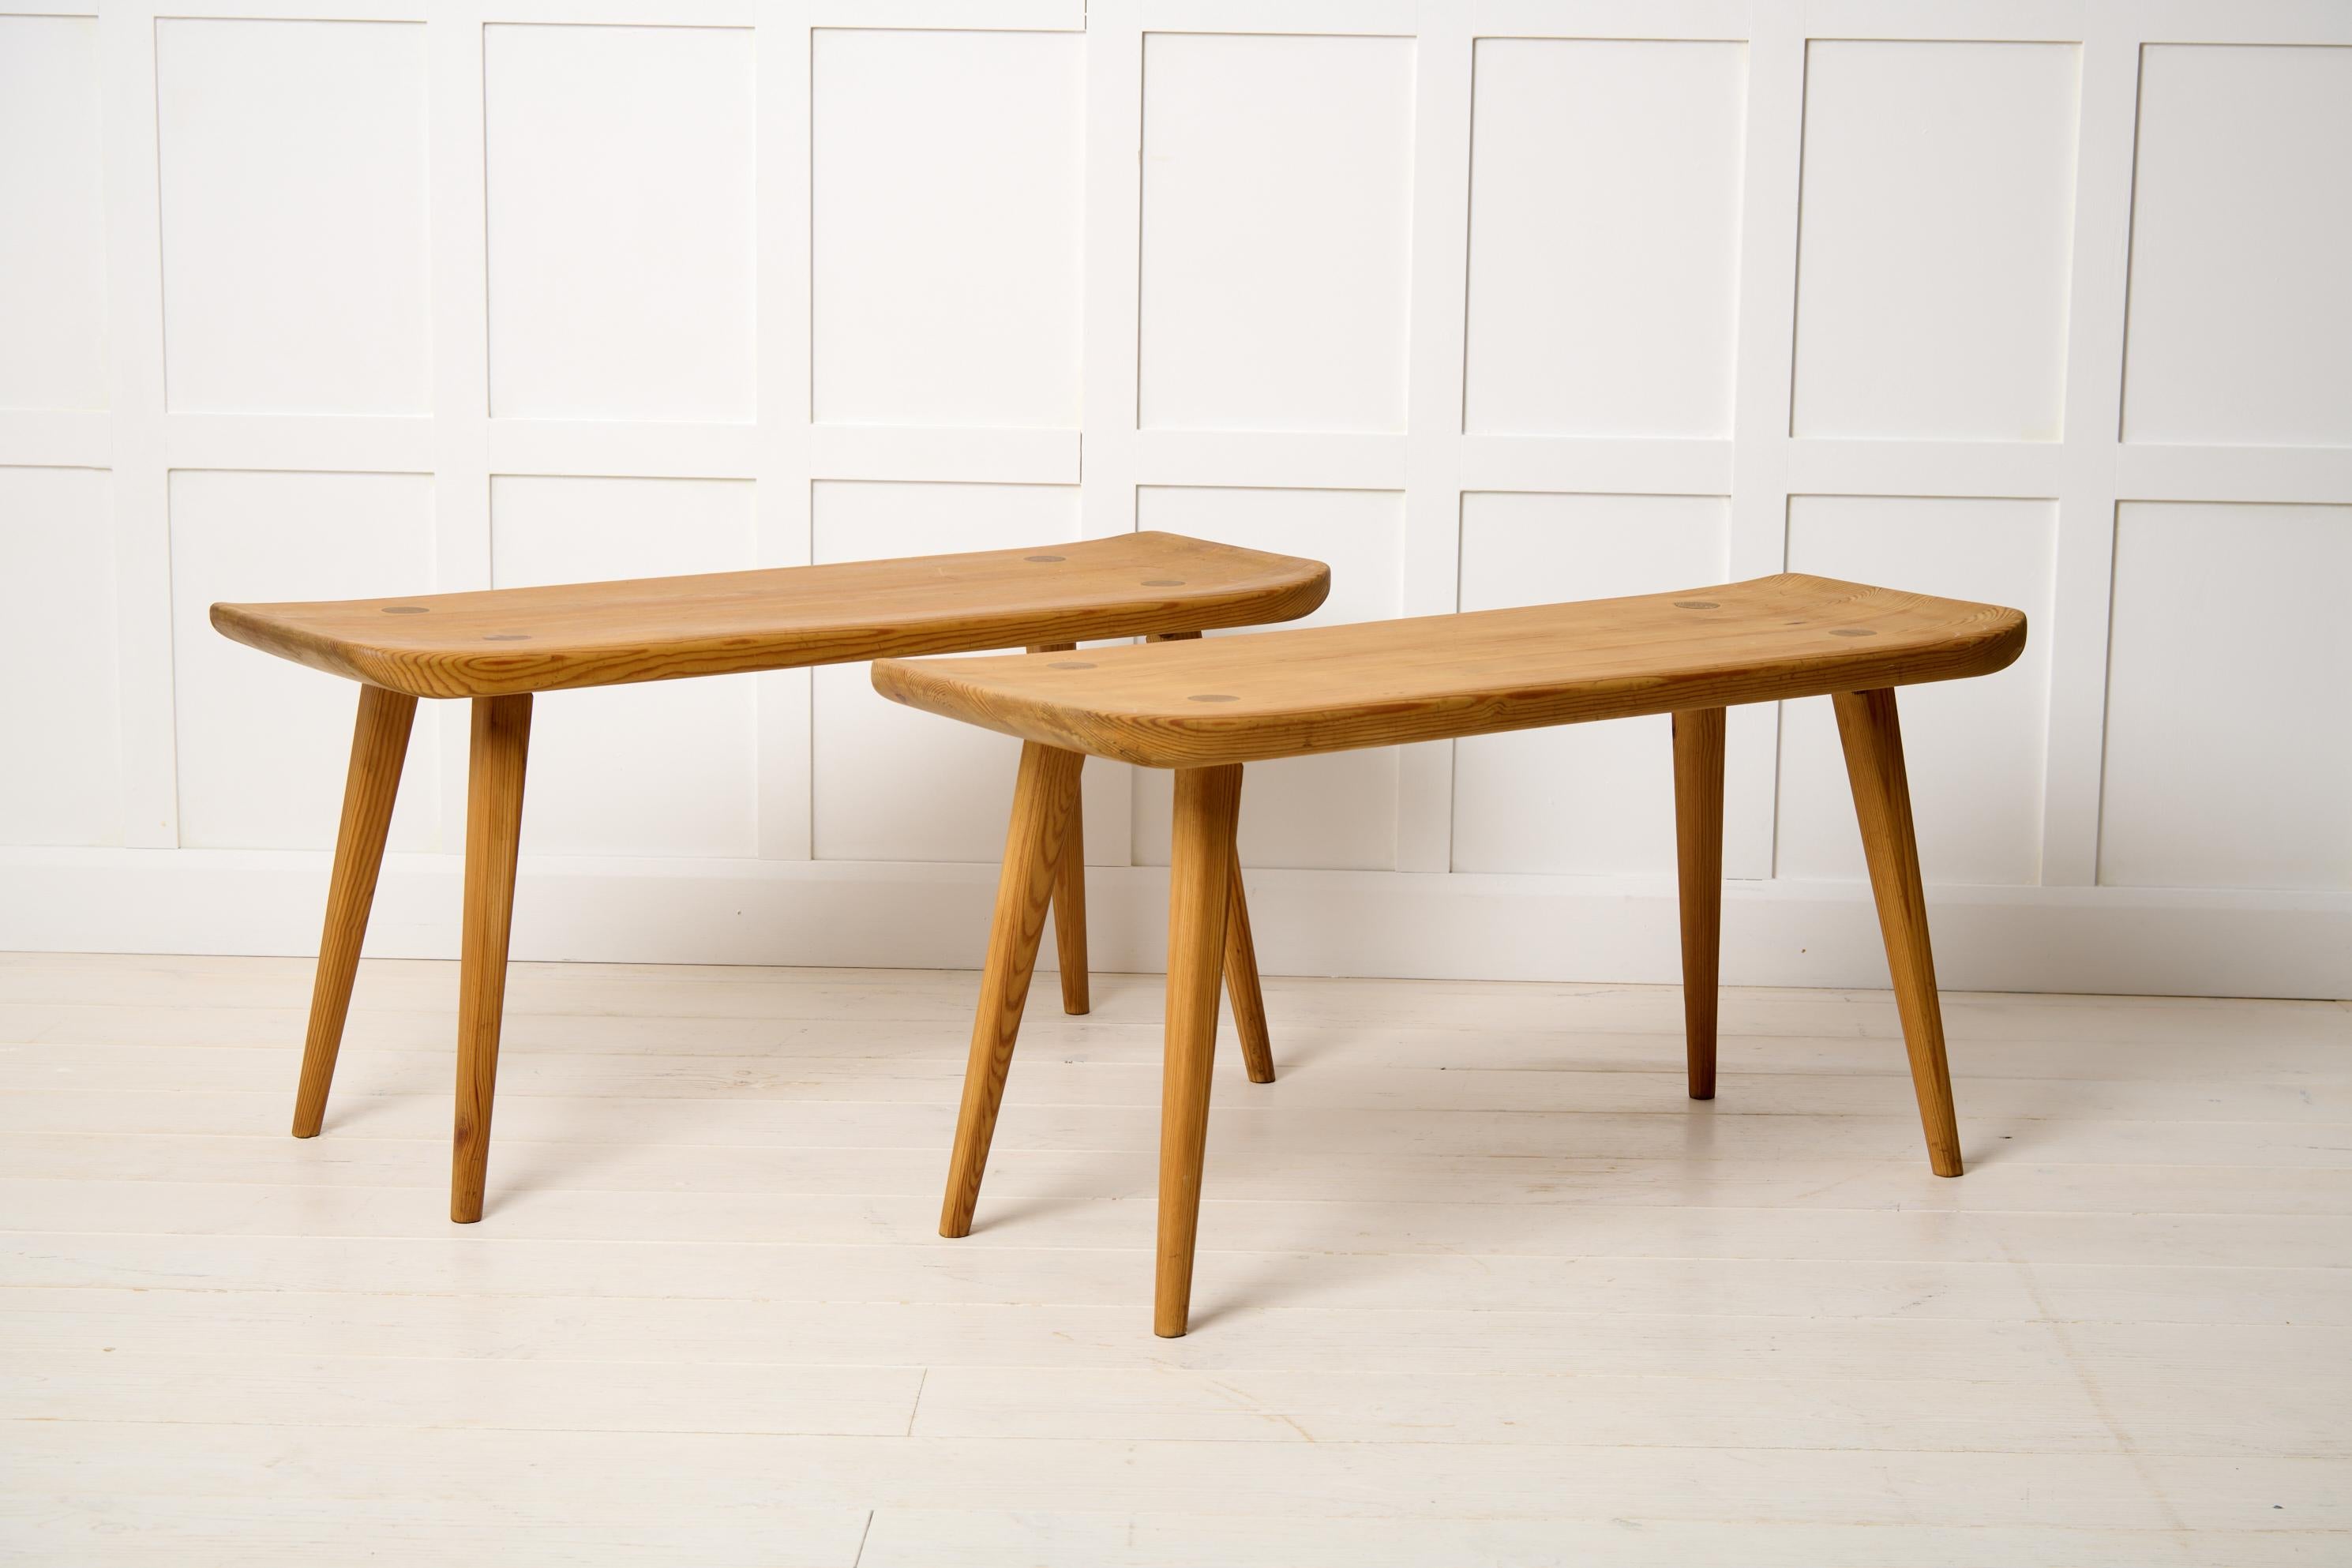 Swedish Modern benches Visingsö by Carl Malmsten. The two benches are from the mid 20th century and made in solid pine stained with acid. Designed in 1953 with beautifully curved characteristic edges. A markers mark underneath for “Svensk Fur”. Good